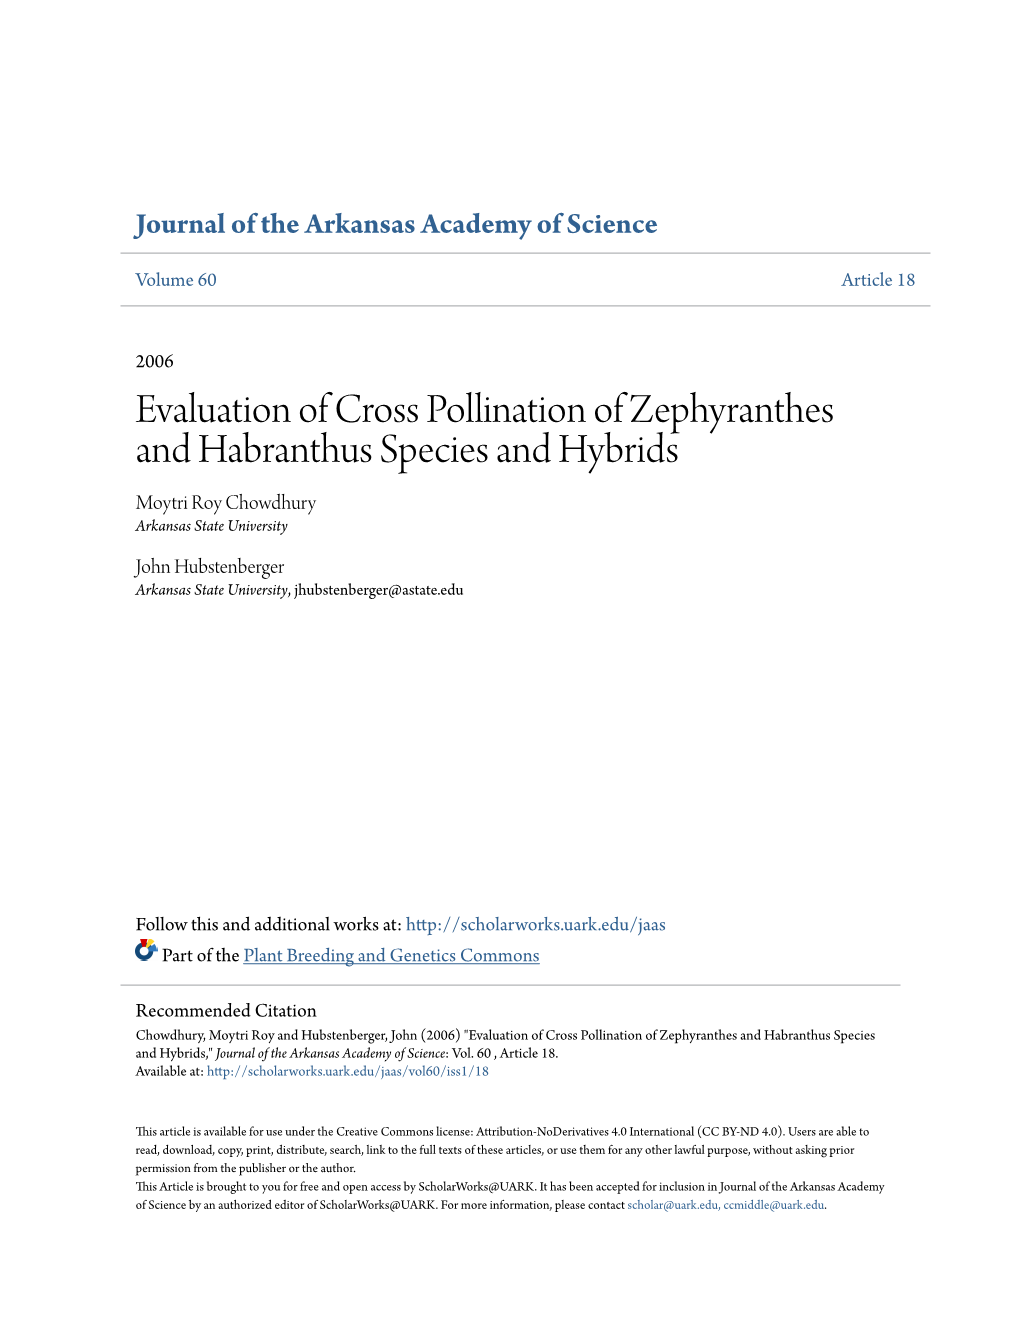 Evaluation of Cross Pollination of Zephyranthes and Habranthus Species and Hybrids Moytri Roy Chowdhury Arkansas State University